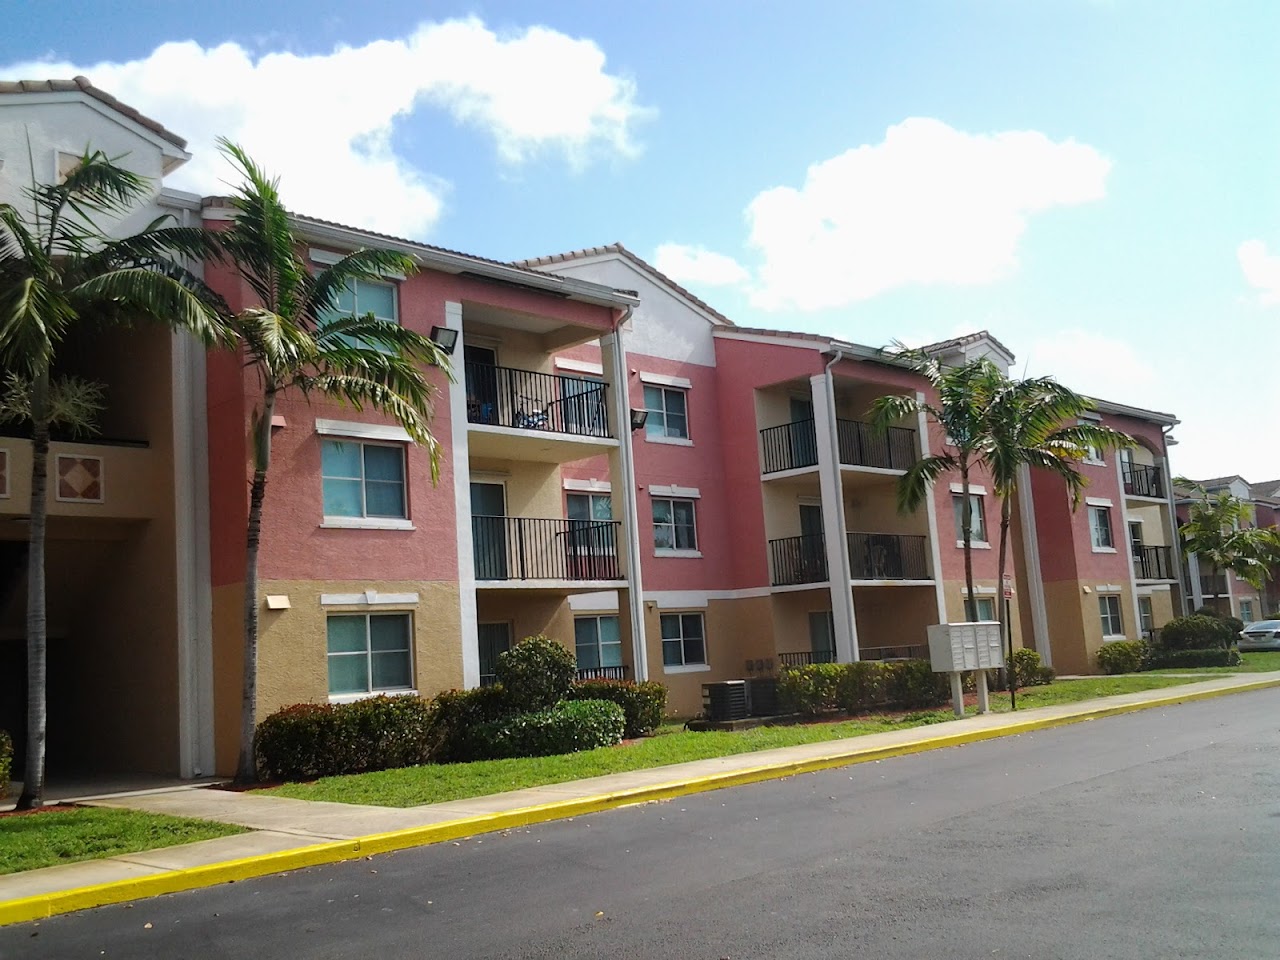 Photo of ATLANTIC PALMS (POMPANO BEACH). Affordable housing located at 1209 NW THIRD AVE POMPANO BEACH, FL 33060